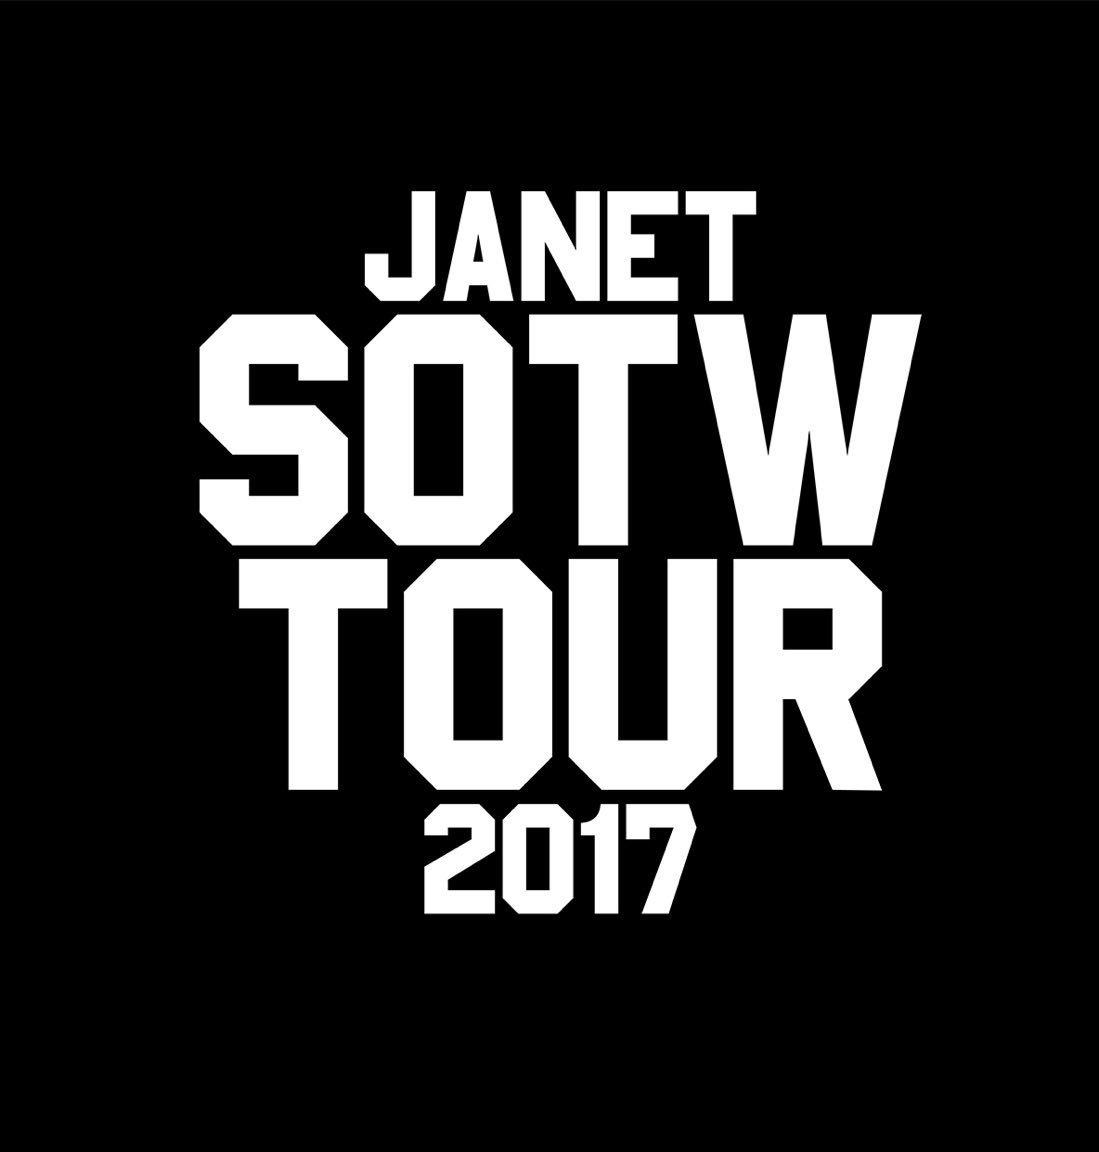 #JanFam I want to see u at #SOTW.
Enter to win front row tickets to the city of your choice➡
https://t.co/dREP49Hf3M https://t.co/IpMhmZCBik